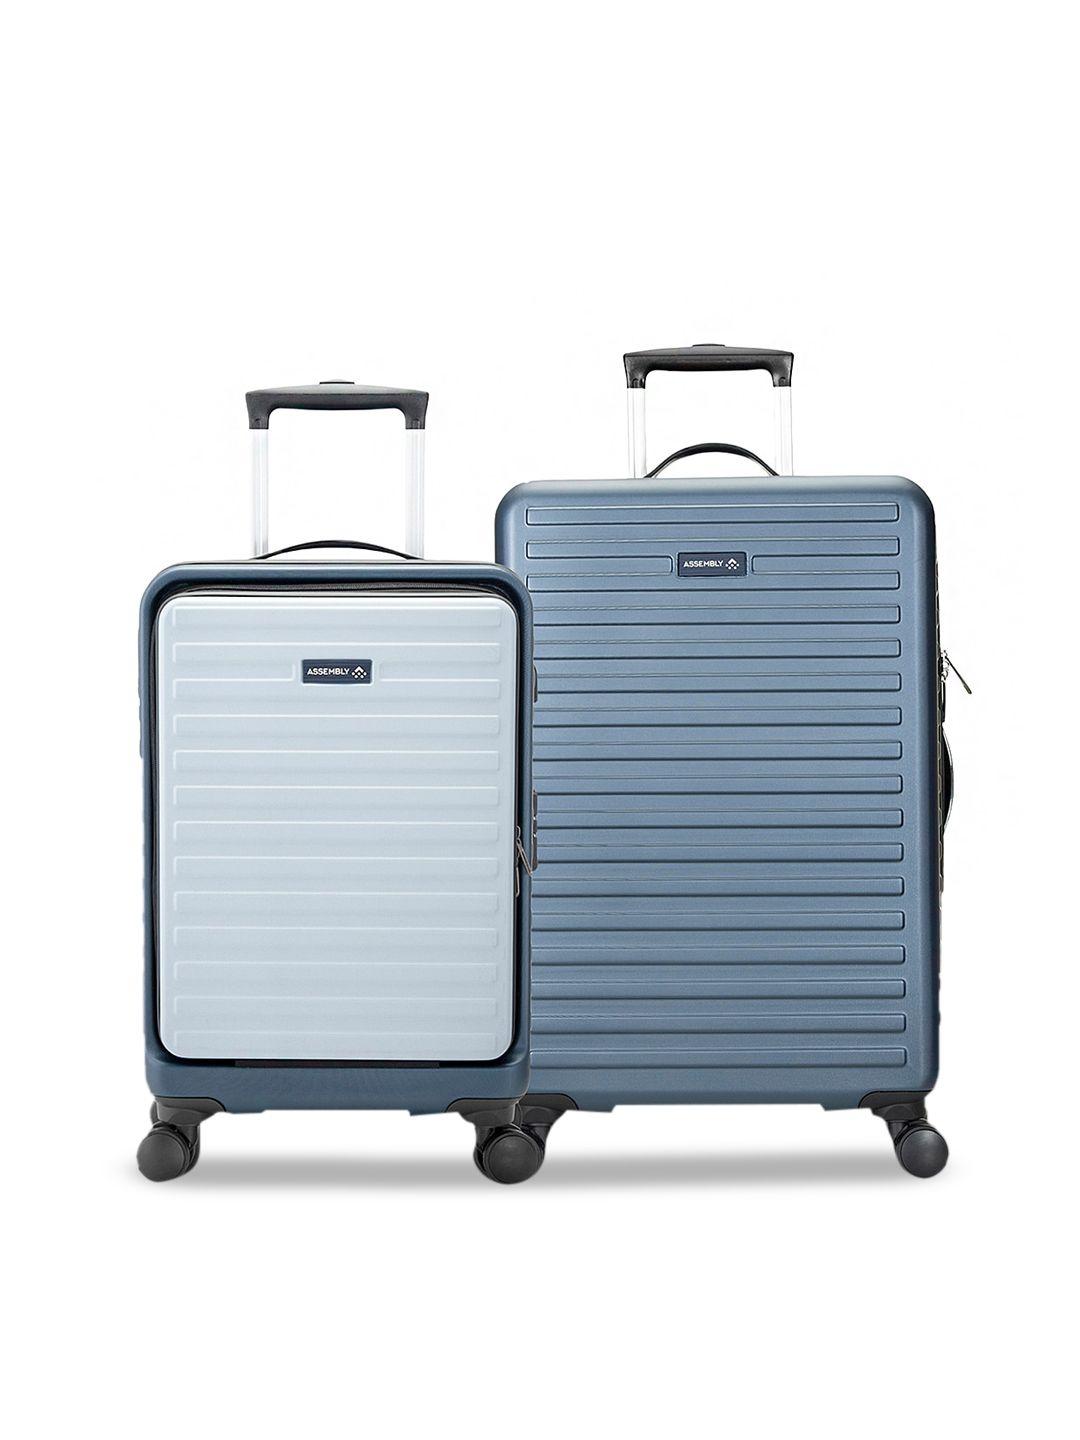 assembly set of 2 blue & silver check in hardsided trolley 67l & cabin luggage bag 42l